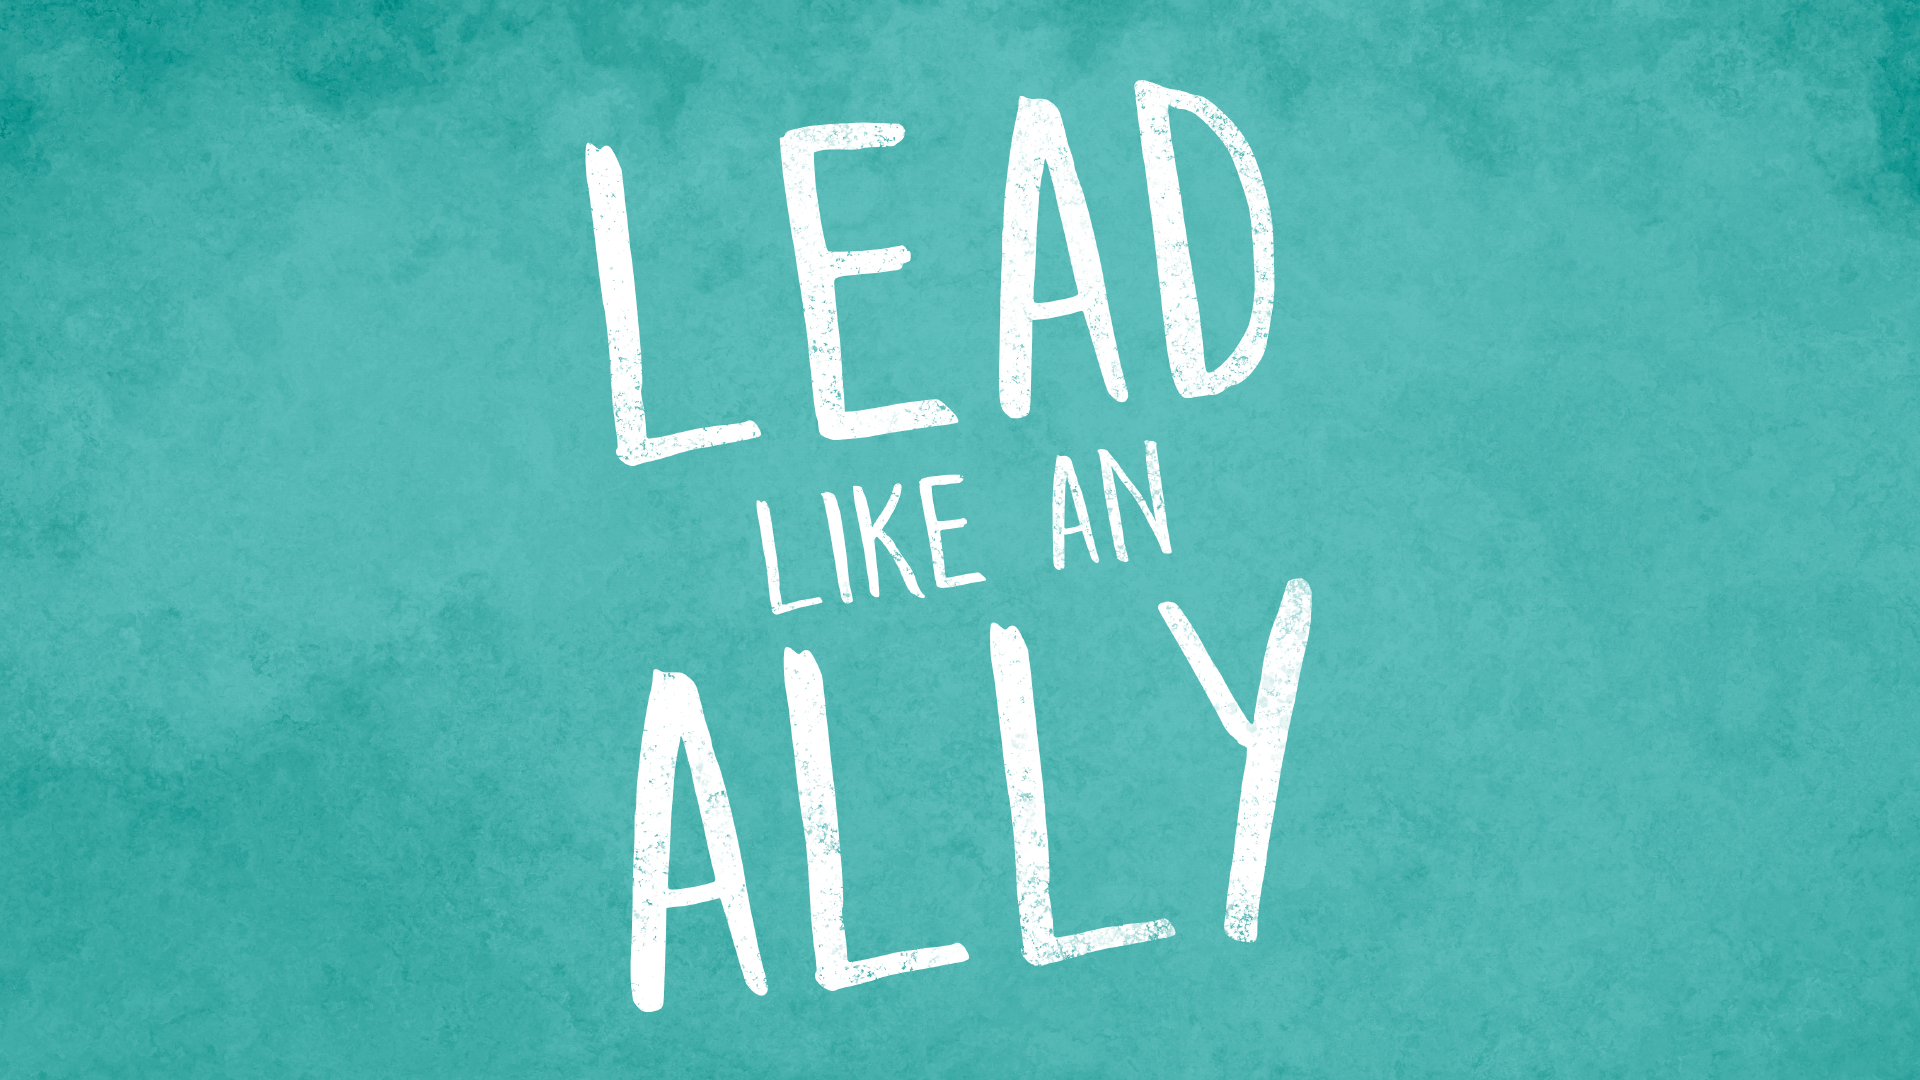 Lead like an ally to promote leadership and inclusion strategies in corporate America